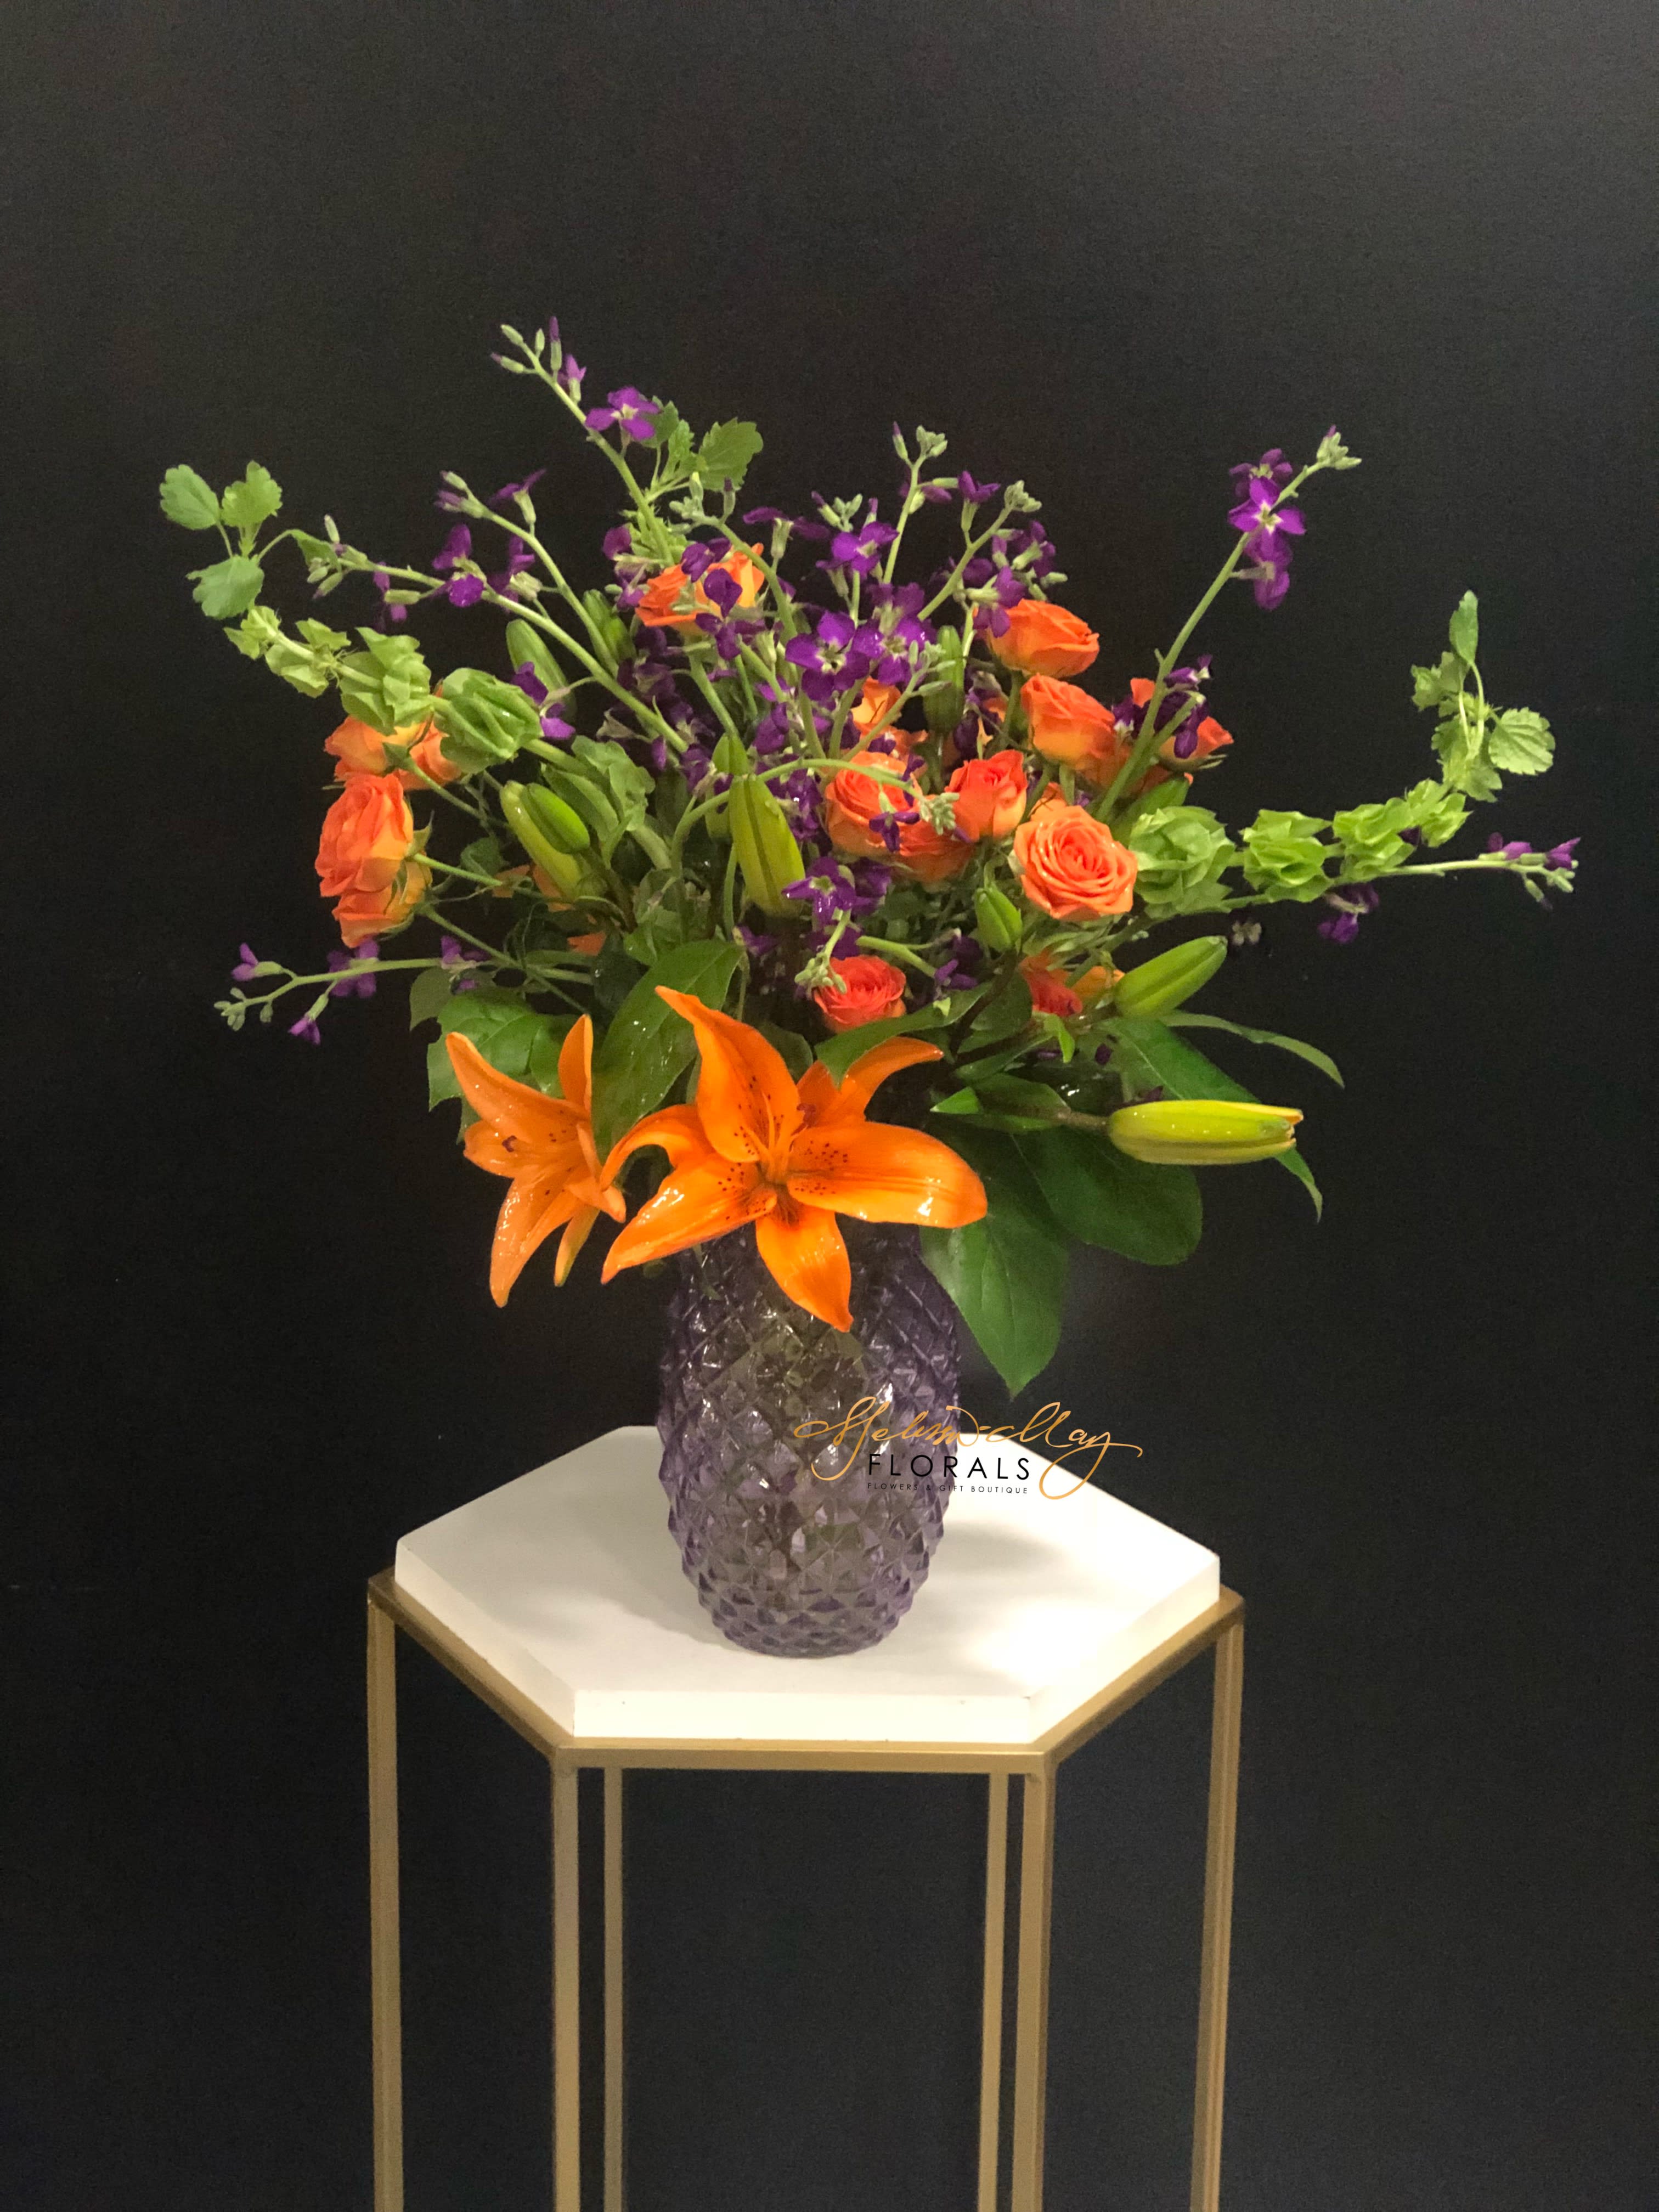 Forever Great - At time you want the world to know how great someone is. Why not show someone that you always see them to be the greatness individual in your life? She has bells of ireland, asiatic lilies, orange spray roses, and purple stock. 